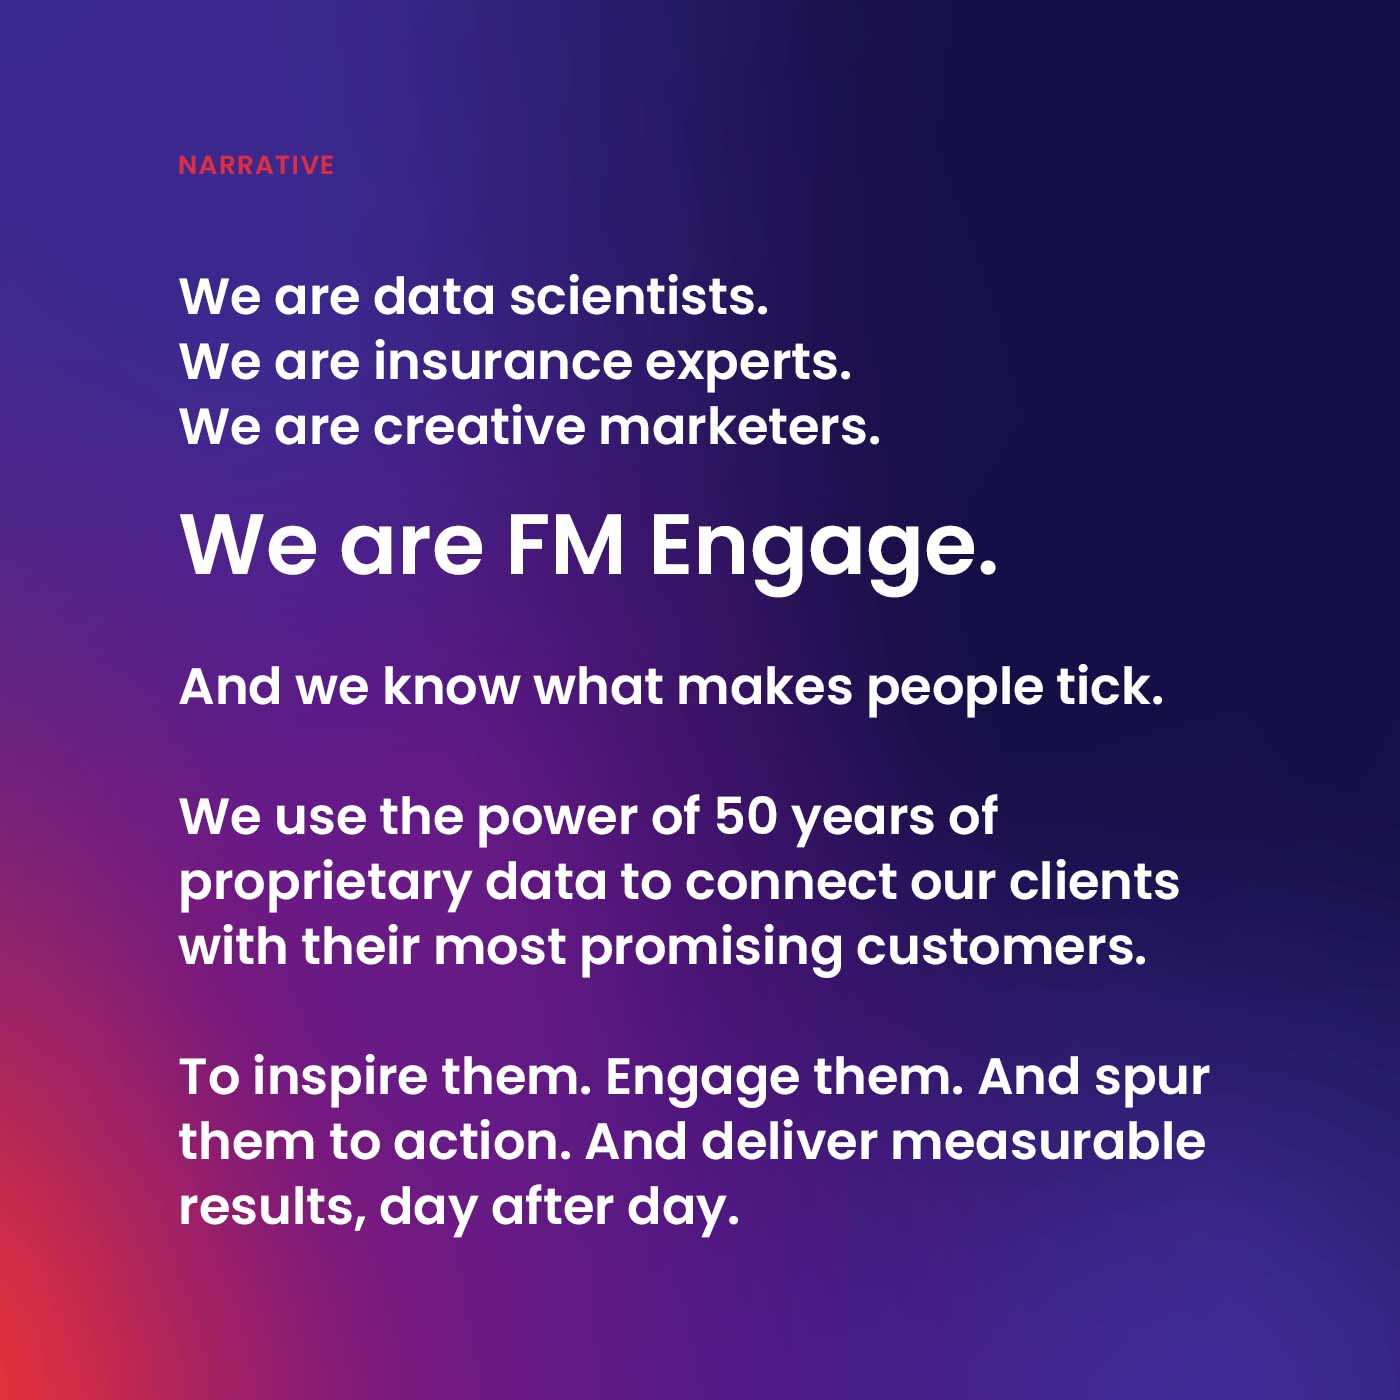 The FM Engage brand narrative, which starts "We are data scientists. We are insurance experts. We are creative marketers."